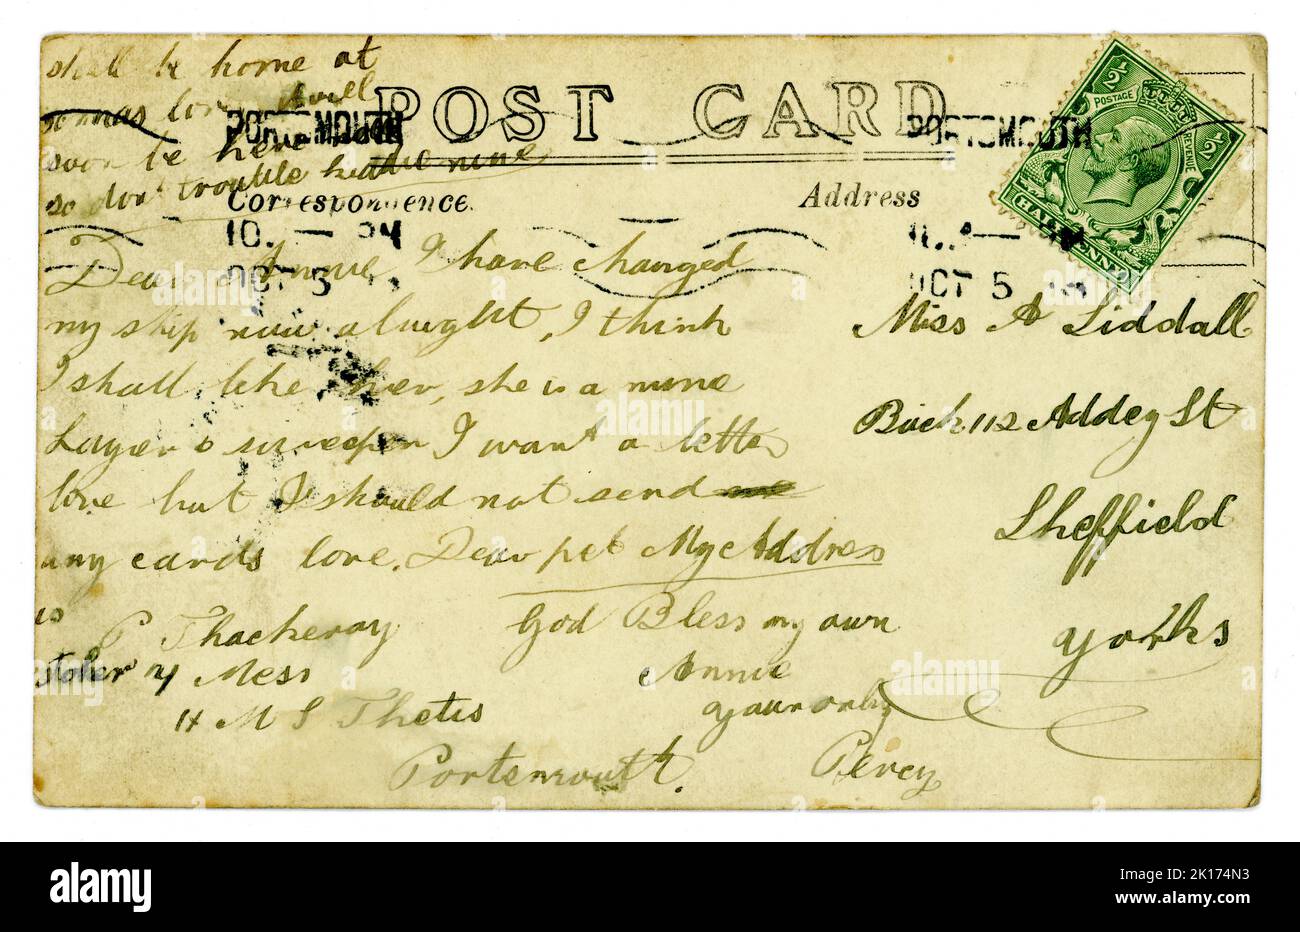 Reverse of WW1 era postcard, green King George V 1/2 d (half pence / penny) stamp- dated and posted from Portsmouth on October 5th 1916, U.K. Stock Photo